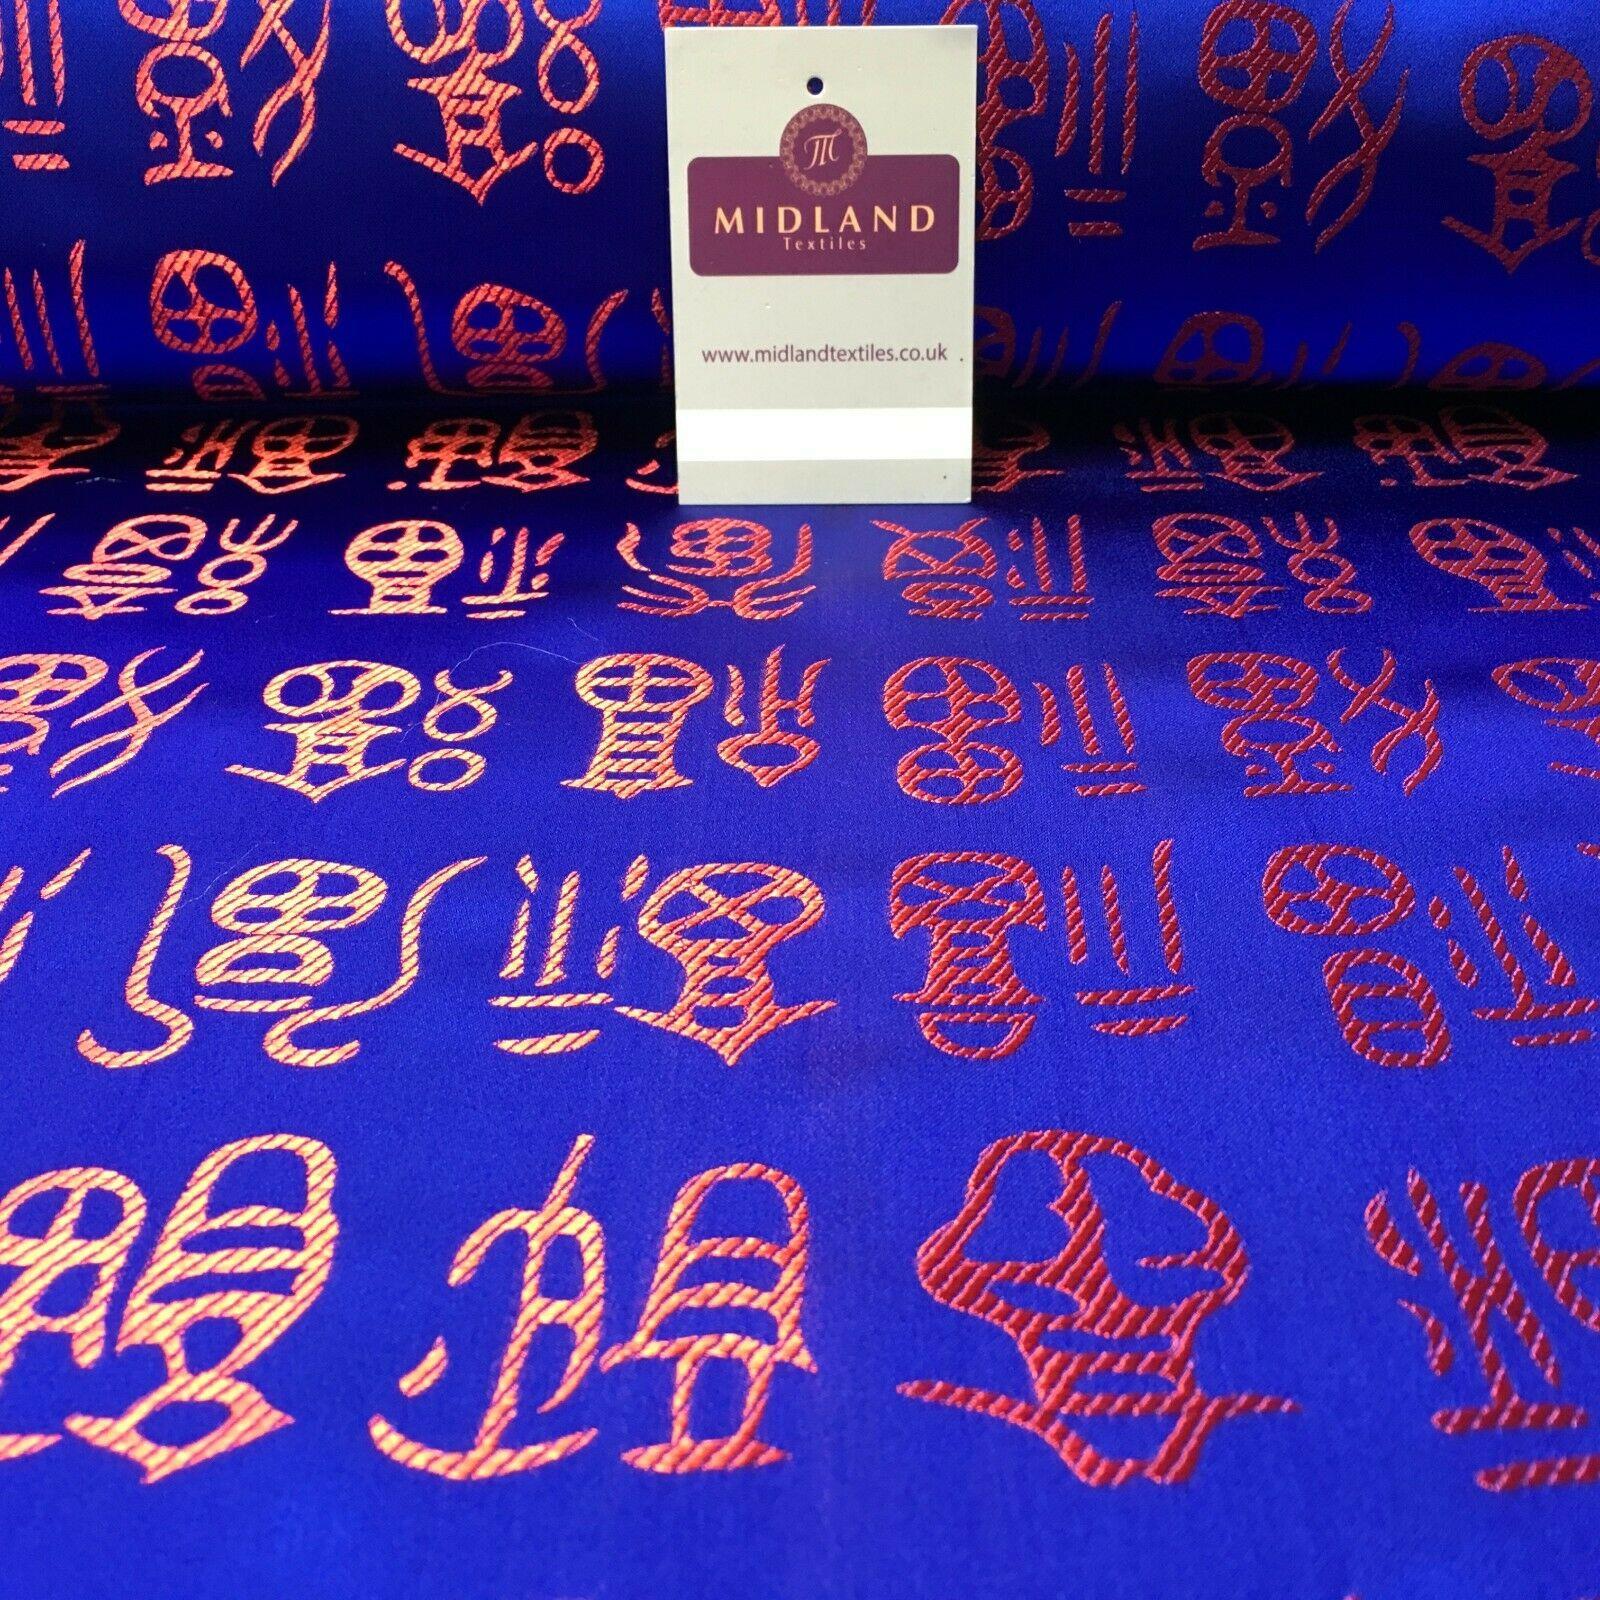 Royal Blue and Red Chinese Words Brocade Satin Dress Fabric 110cm Wide M395-29